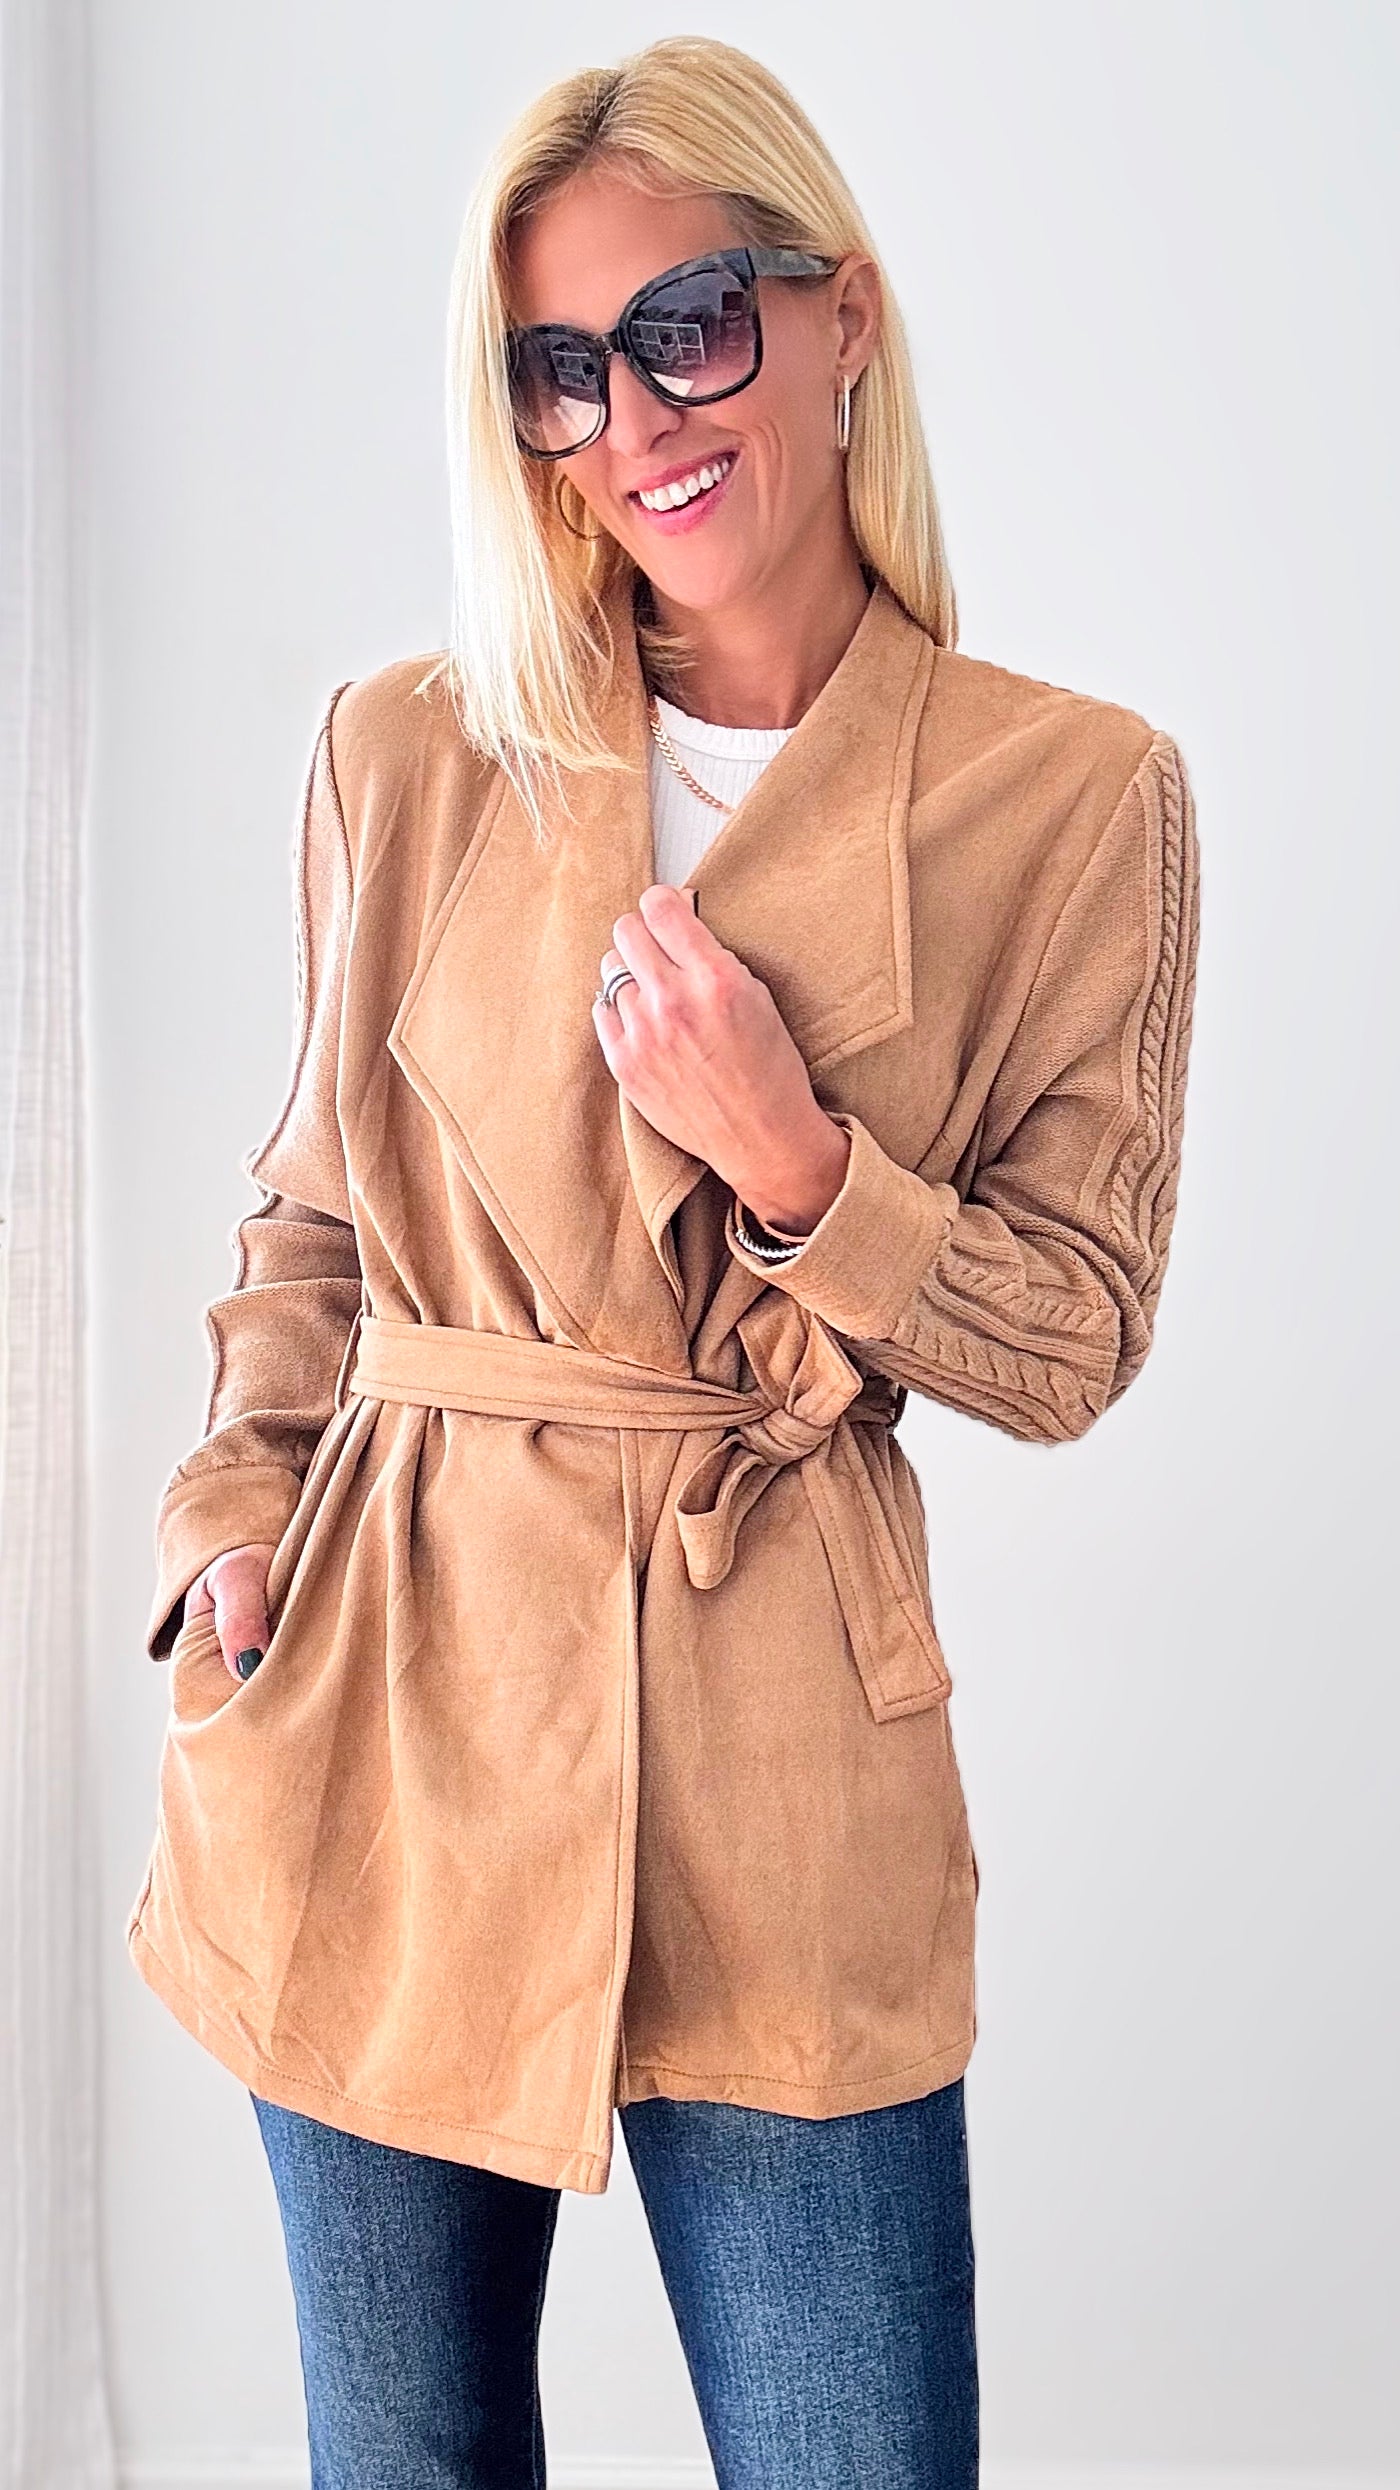 Sedona Suede Tie Jacket-160 Jackets-Blue Blush-Coastal Bloom Boutique, find the trendiest versions of the popular styles and looks Located in Indialantic, FL